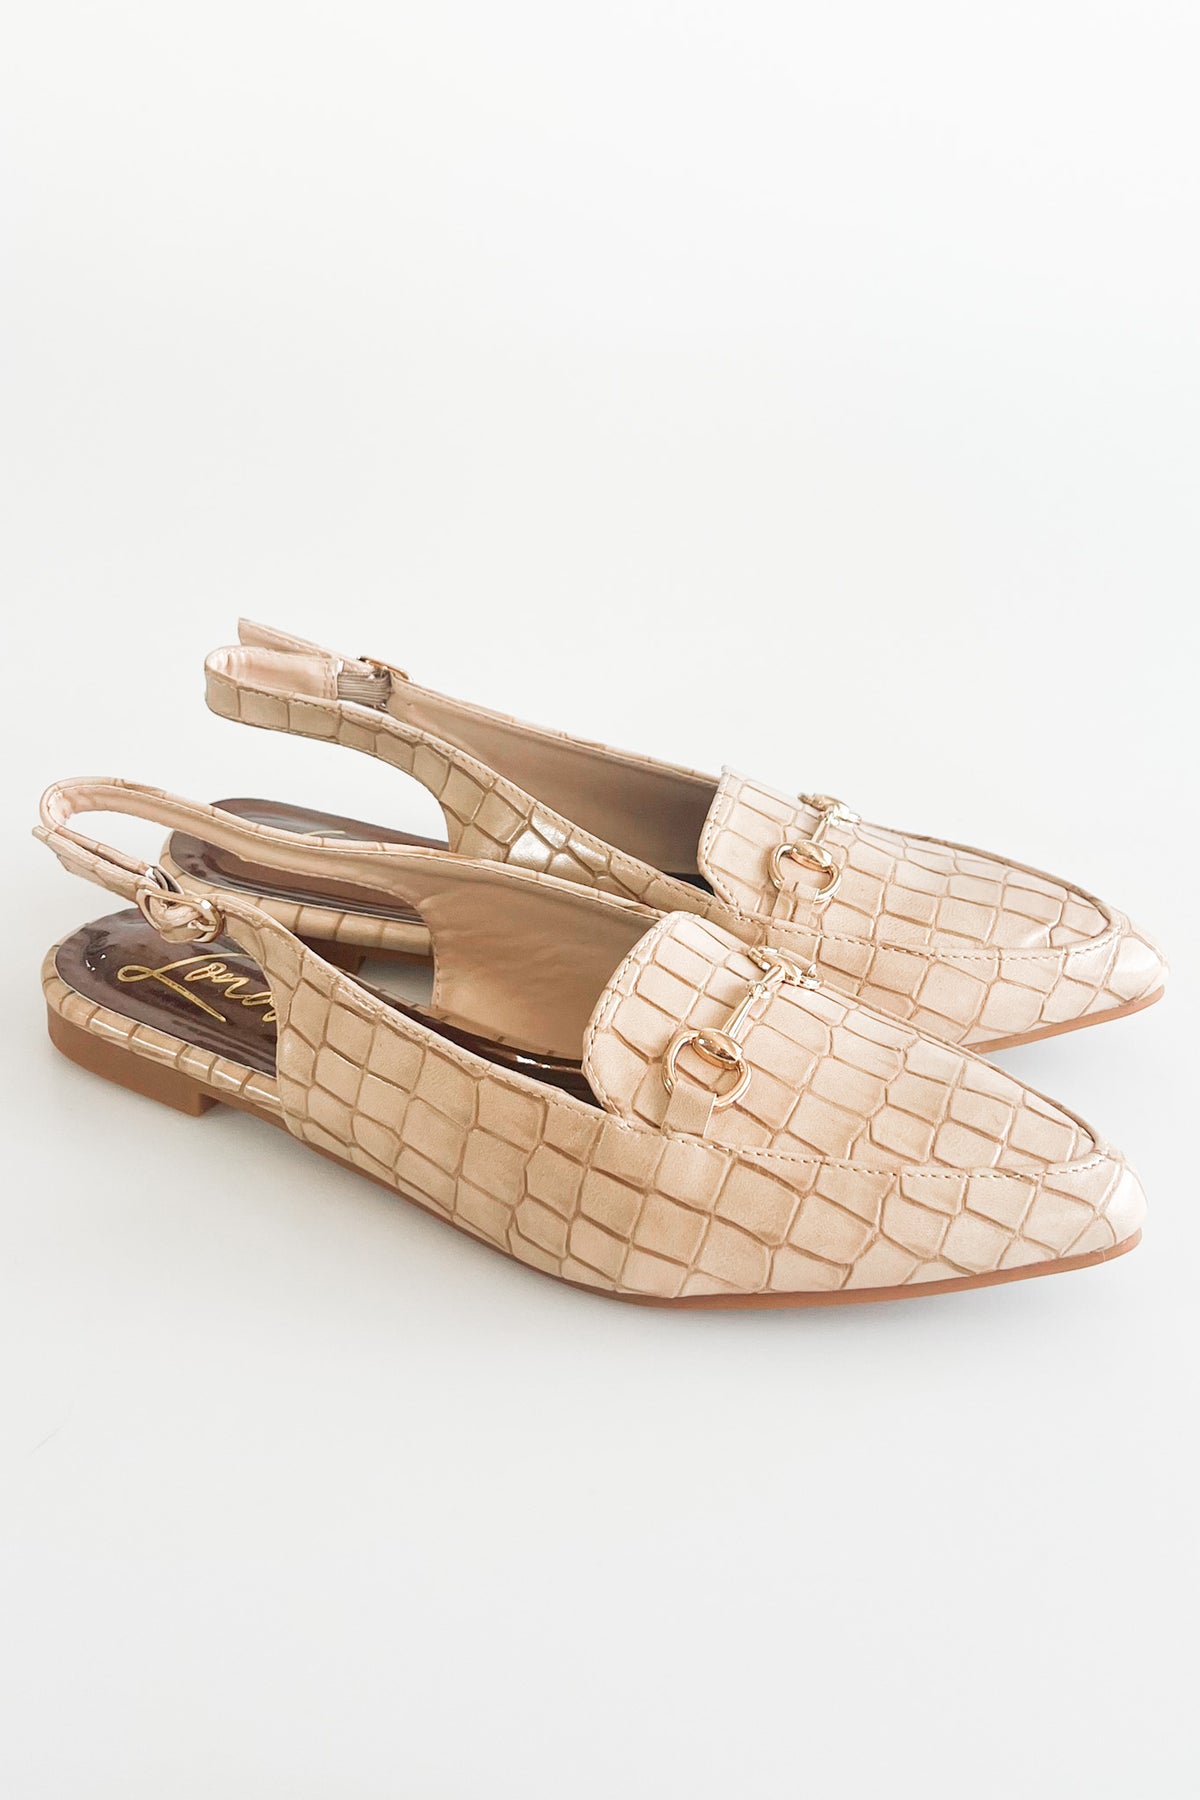 Croc Flat Slingback Sandals - Medium Latte-250 Shoes-RagCompany-Coastal Bloom Boutique, find the trendiest versions of the popular styles and looks Located in Indialantic, FL